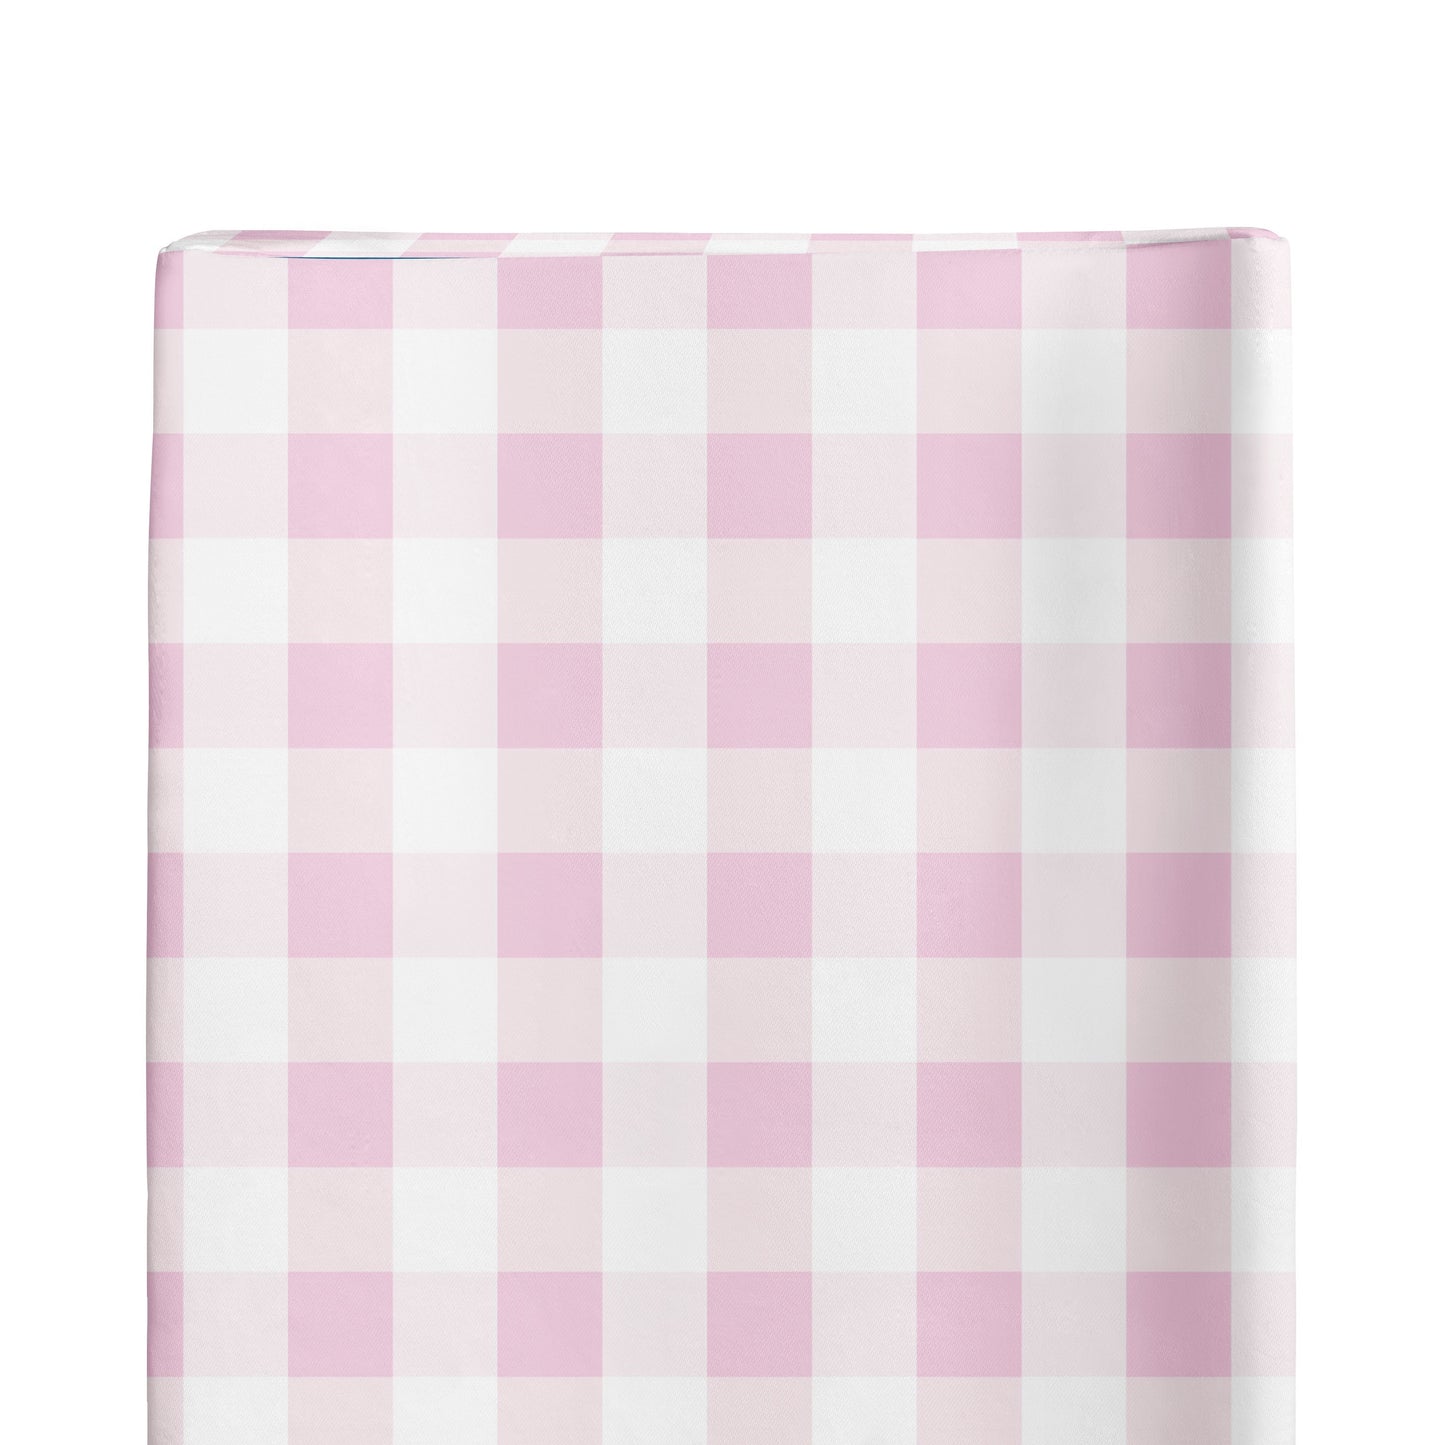 Changing Pad Cover Girl, 100% Cotton, Baby Changing Table Covers for Girls, Farmhouse Nursery Decor Pink Gingham Plaid Squares